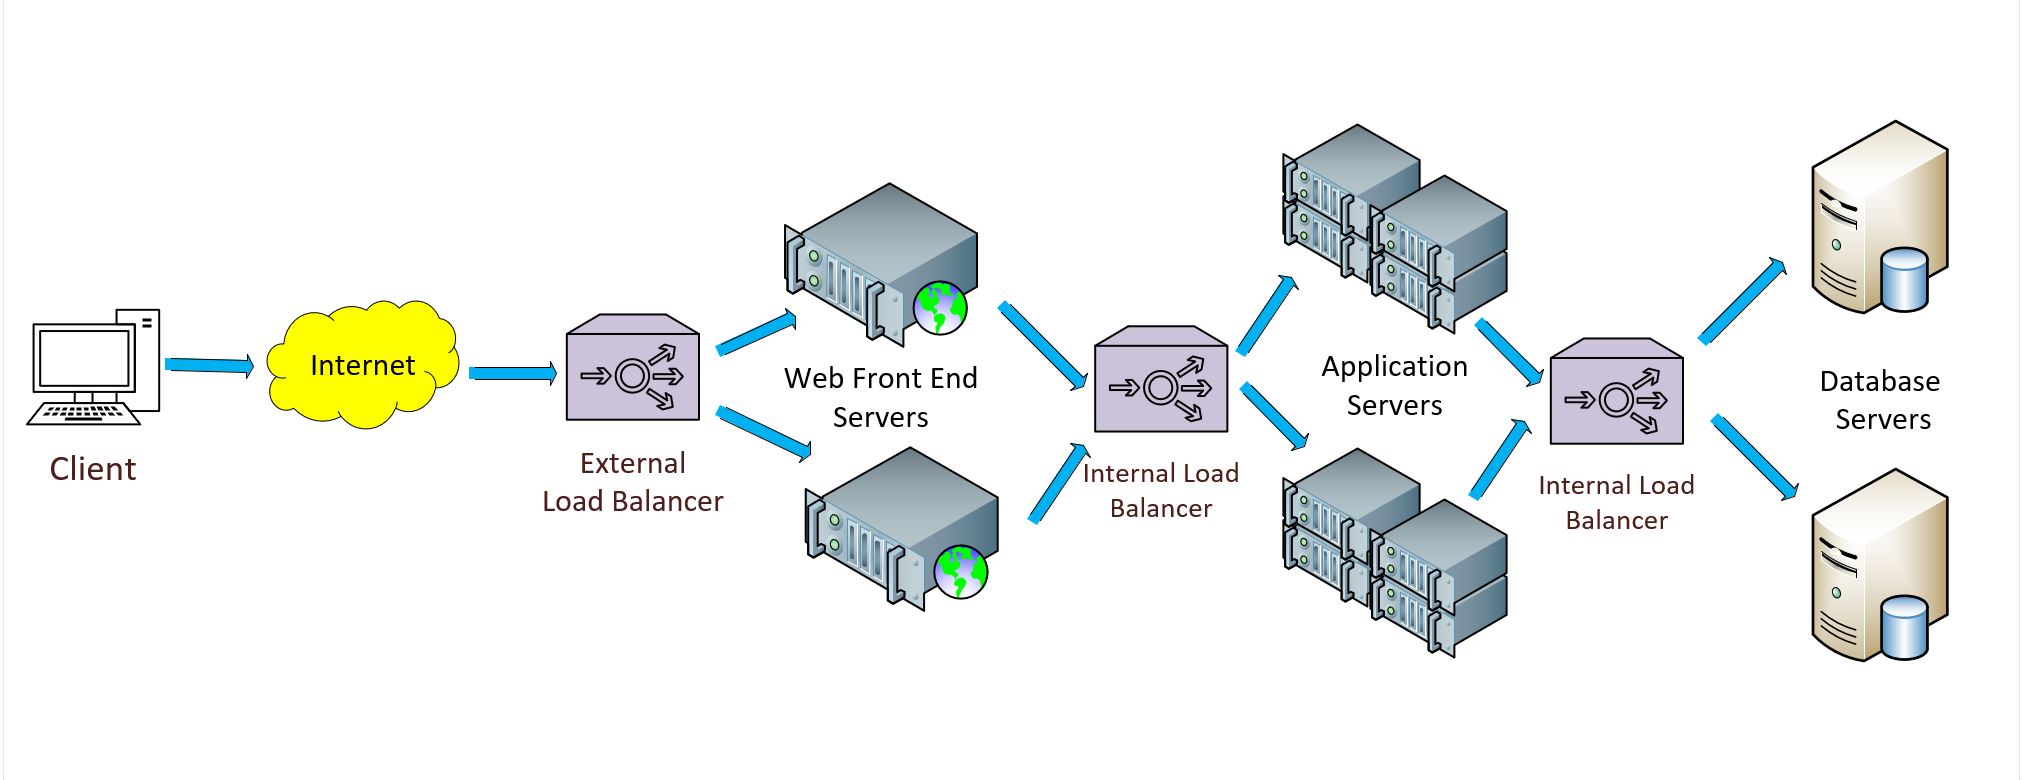 Where to place Load Balancers.